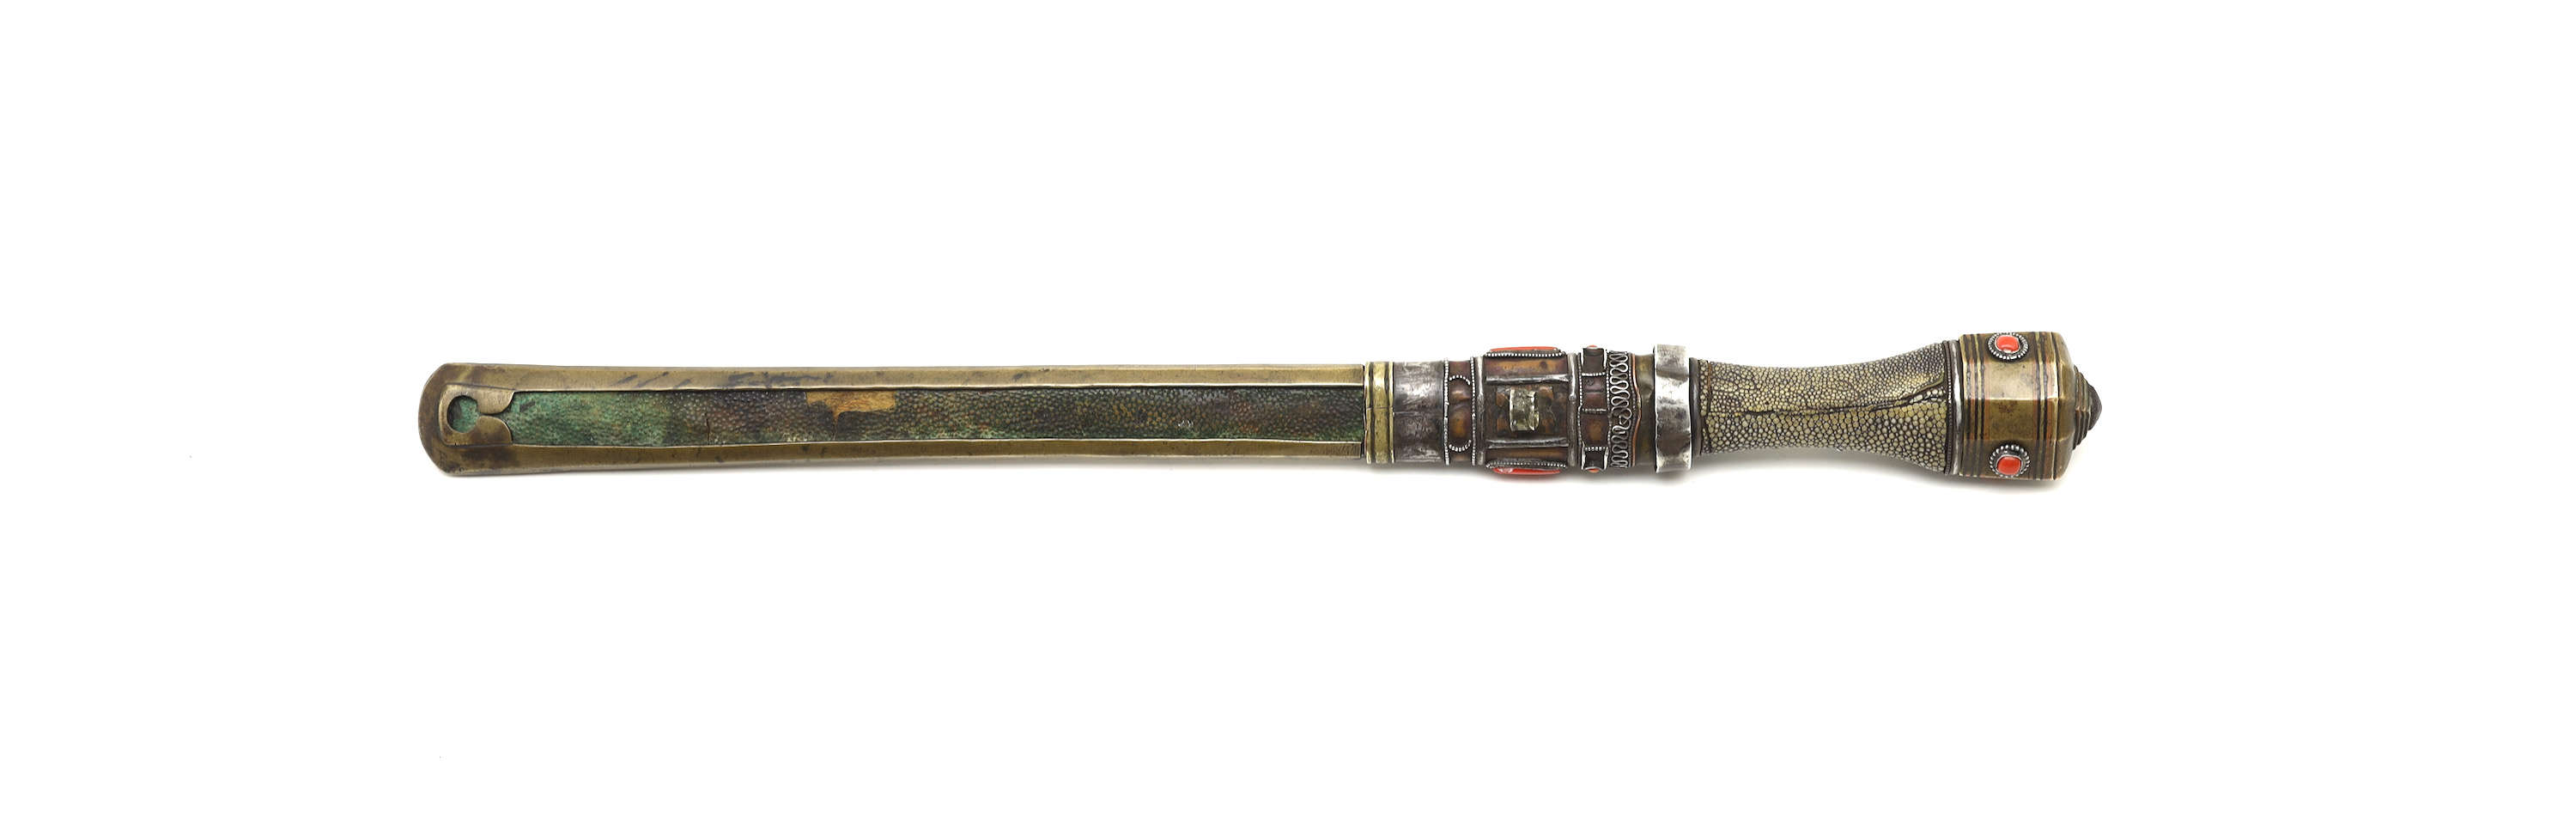 Coral and turquoise studded Tibetan Kham dagger